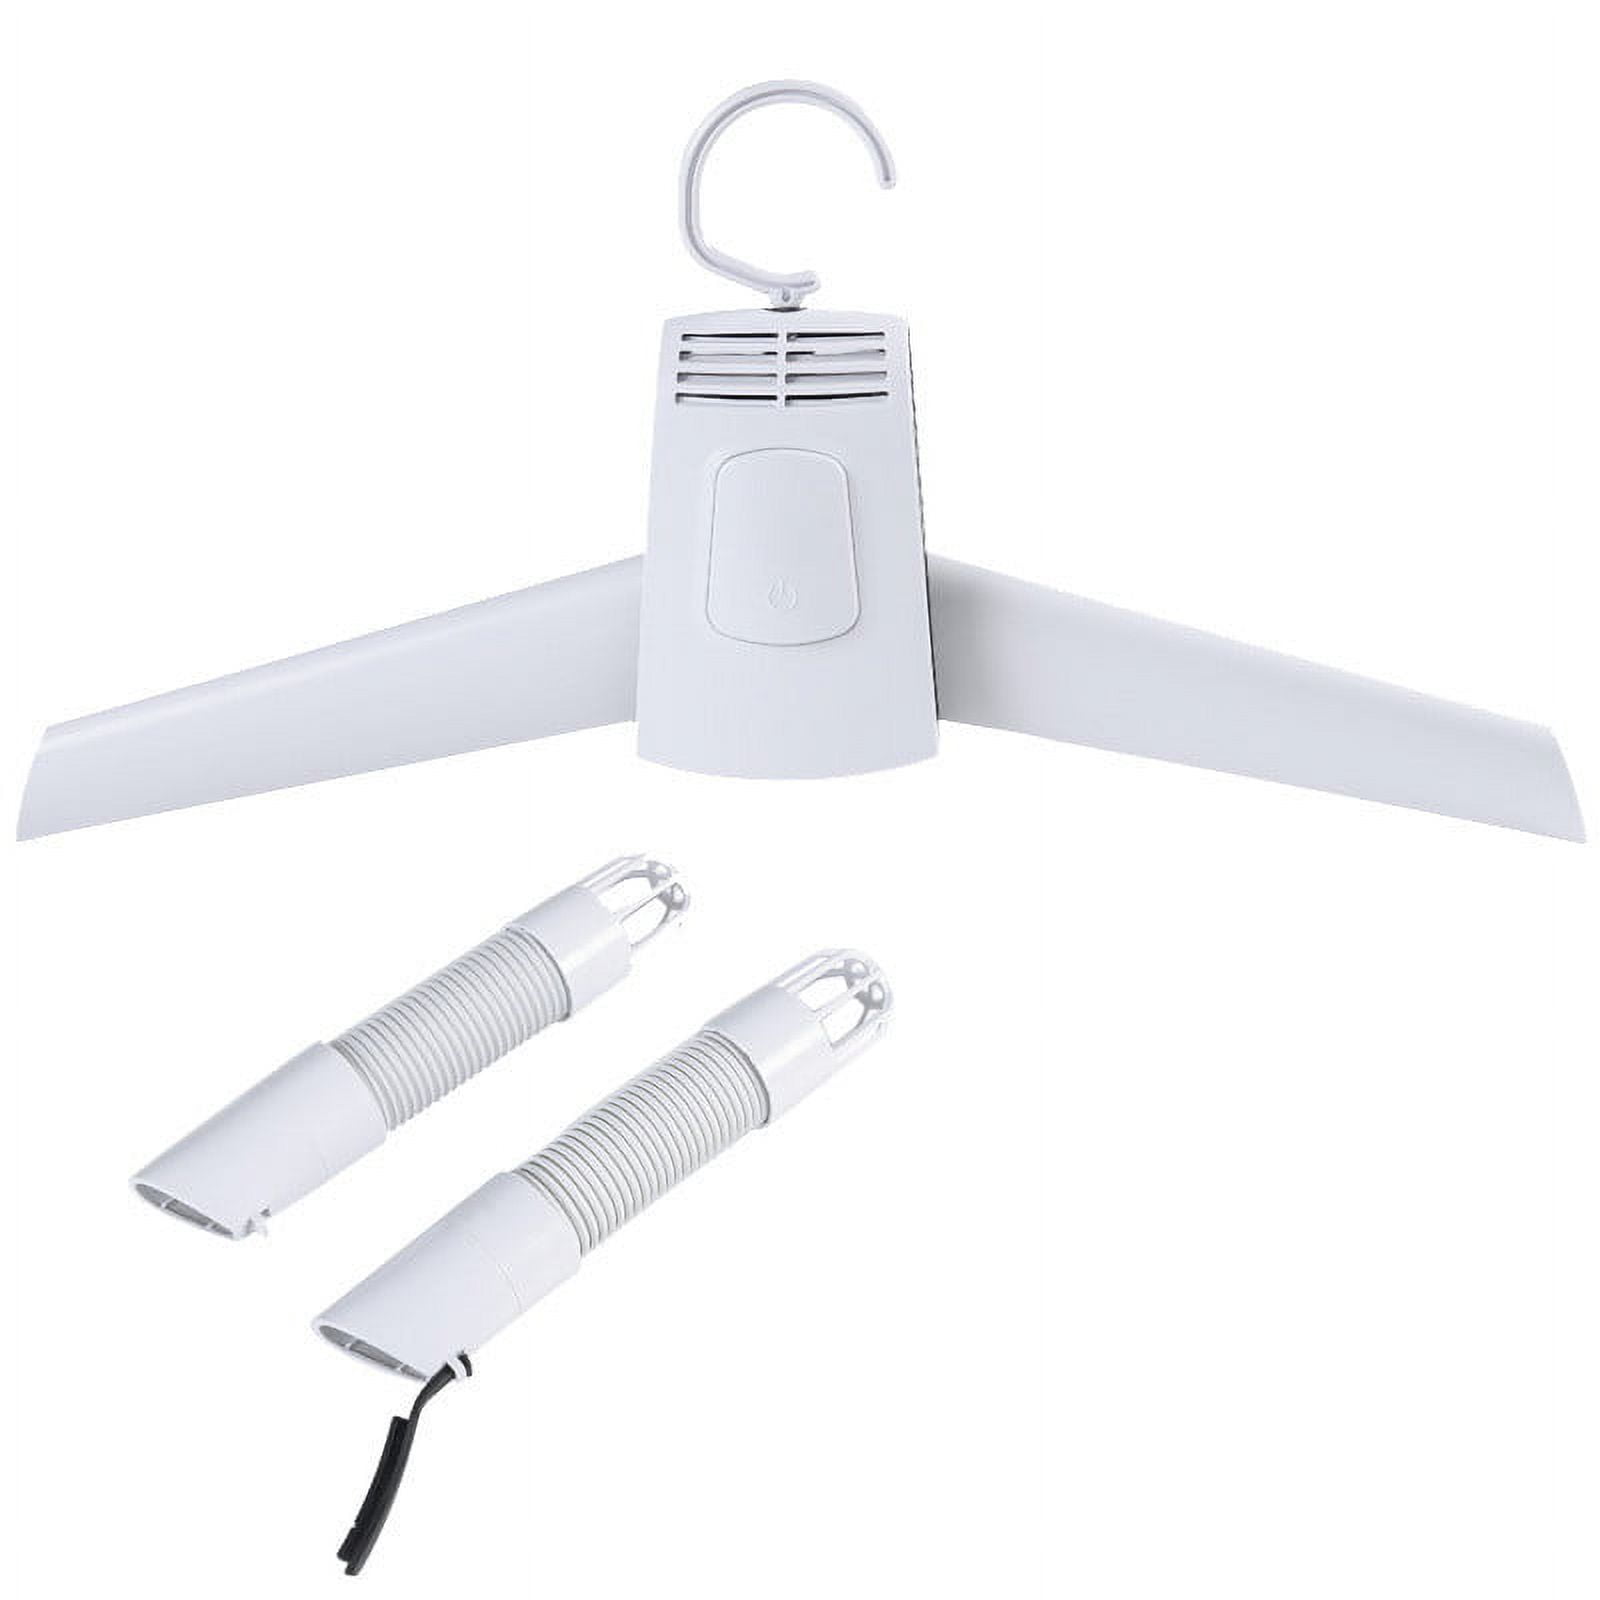 Happyline Portable Clothing Drying Hanger, Compact Electric